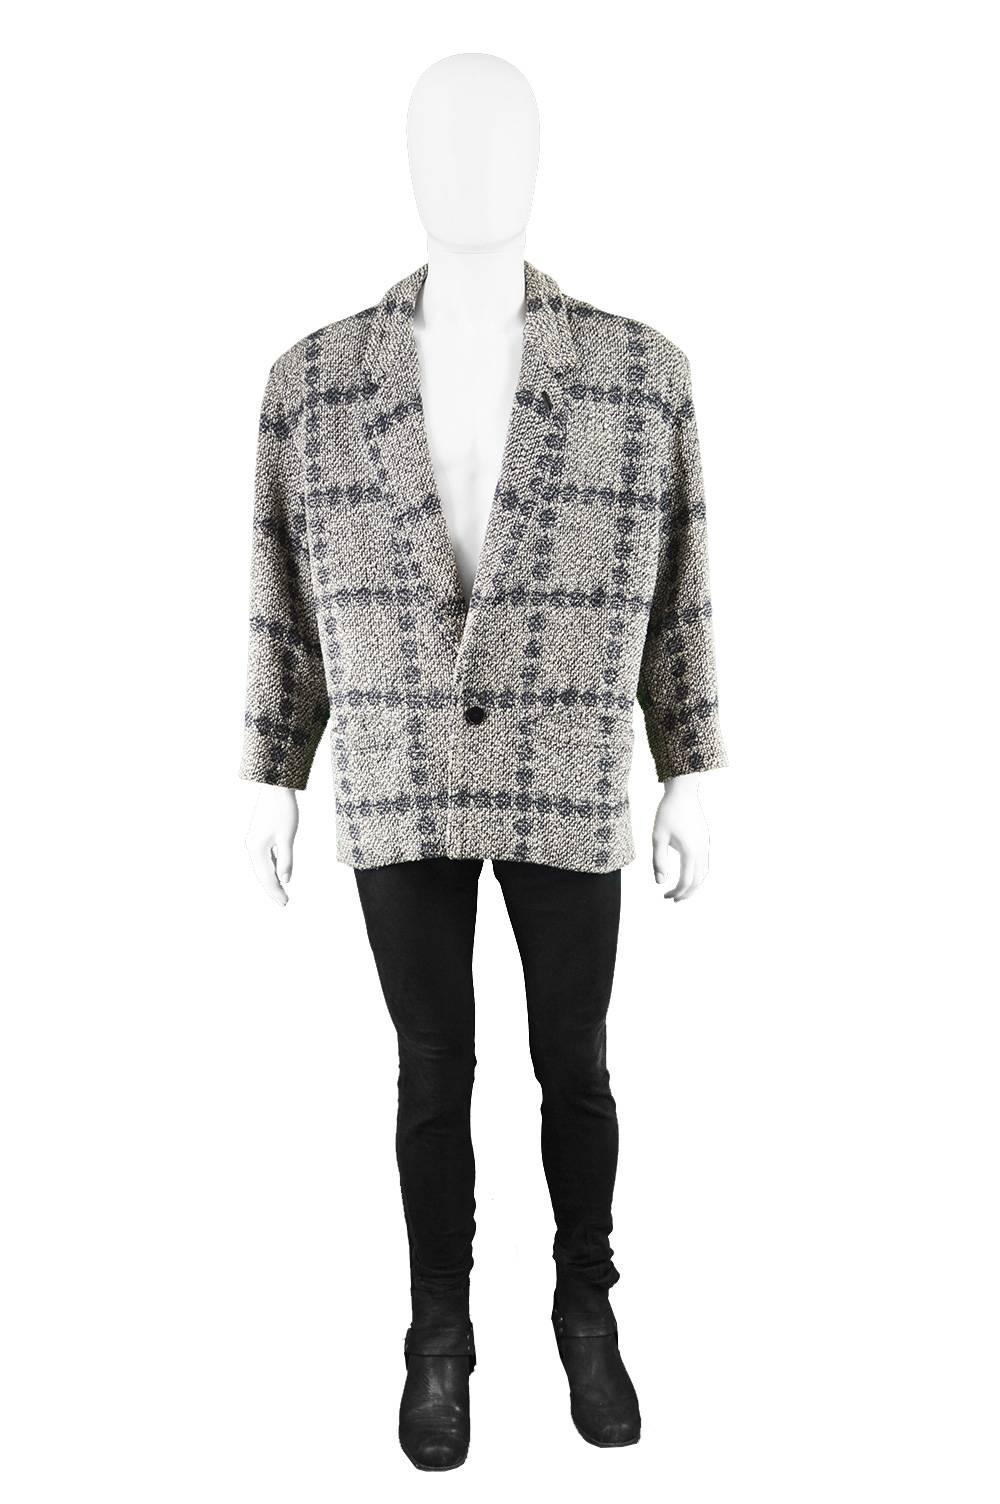 Gianni Versace Men's Vintage 80s Bold Shouldered Wool Tweed Blazer

Size: Marked 48 / Medium which gives a boxy, loose fit on the chest with a more tapered waist. 
Chest - 46” / 117cm 
Waist - 40” / 101cm
Length (Shoulder to Hem) - 27” /